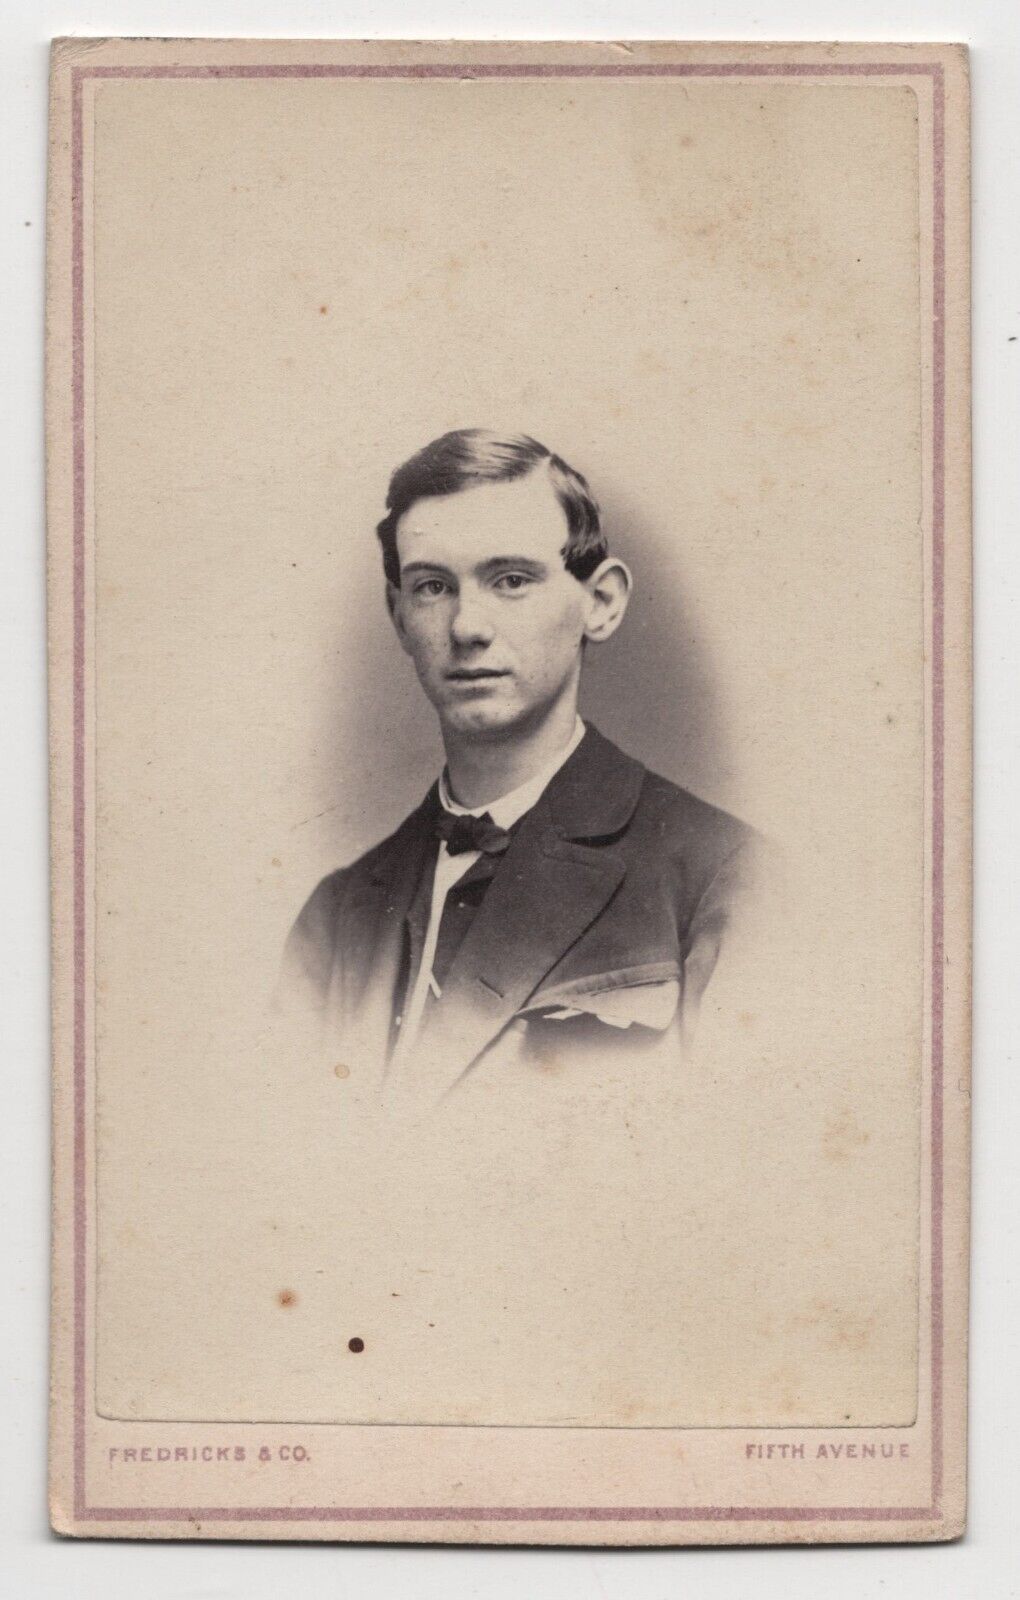 ANTIQUE CDV CIRCA 1860s FREDRICKS & CO. HANDSOME YOUNG MAN IN SUIT NEW YORK